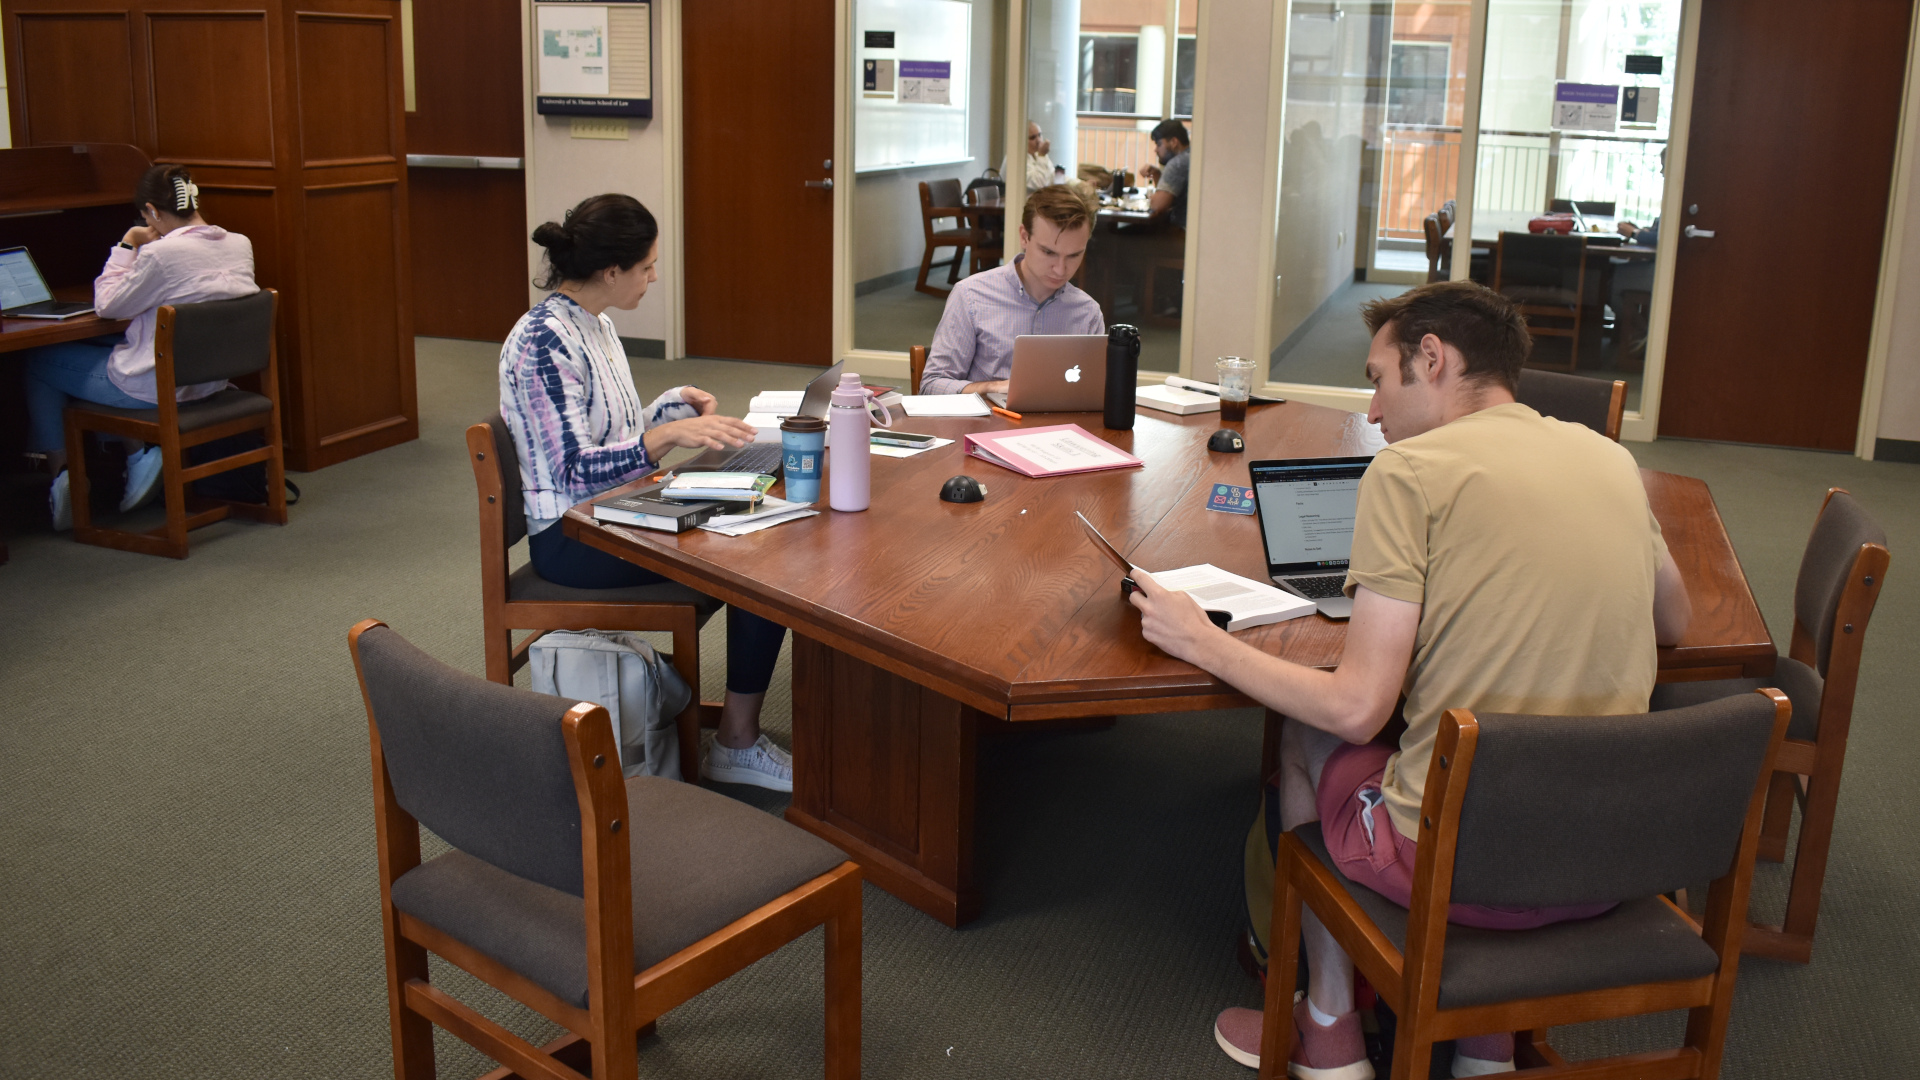 Three law students studying in the library